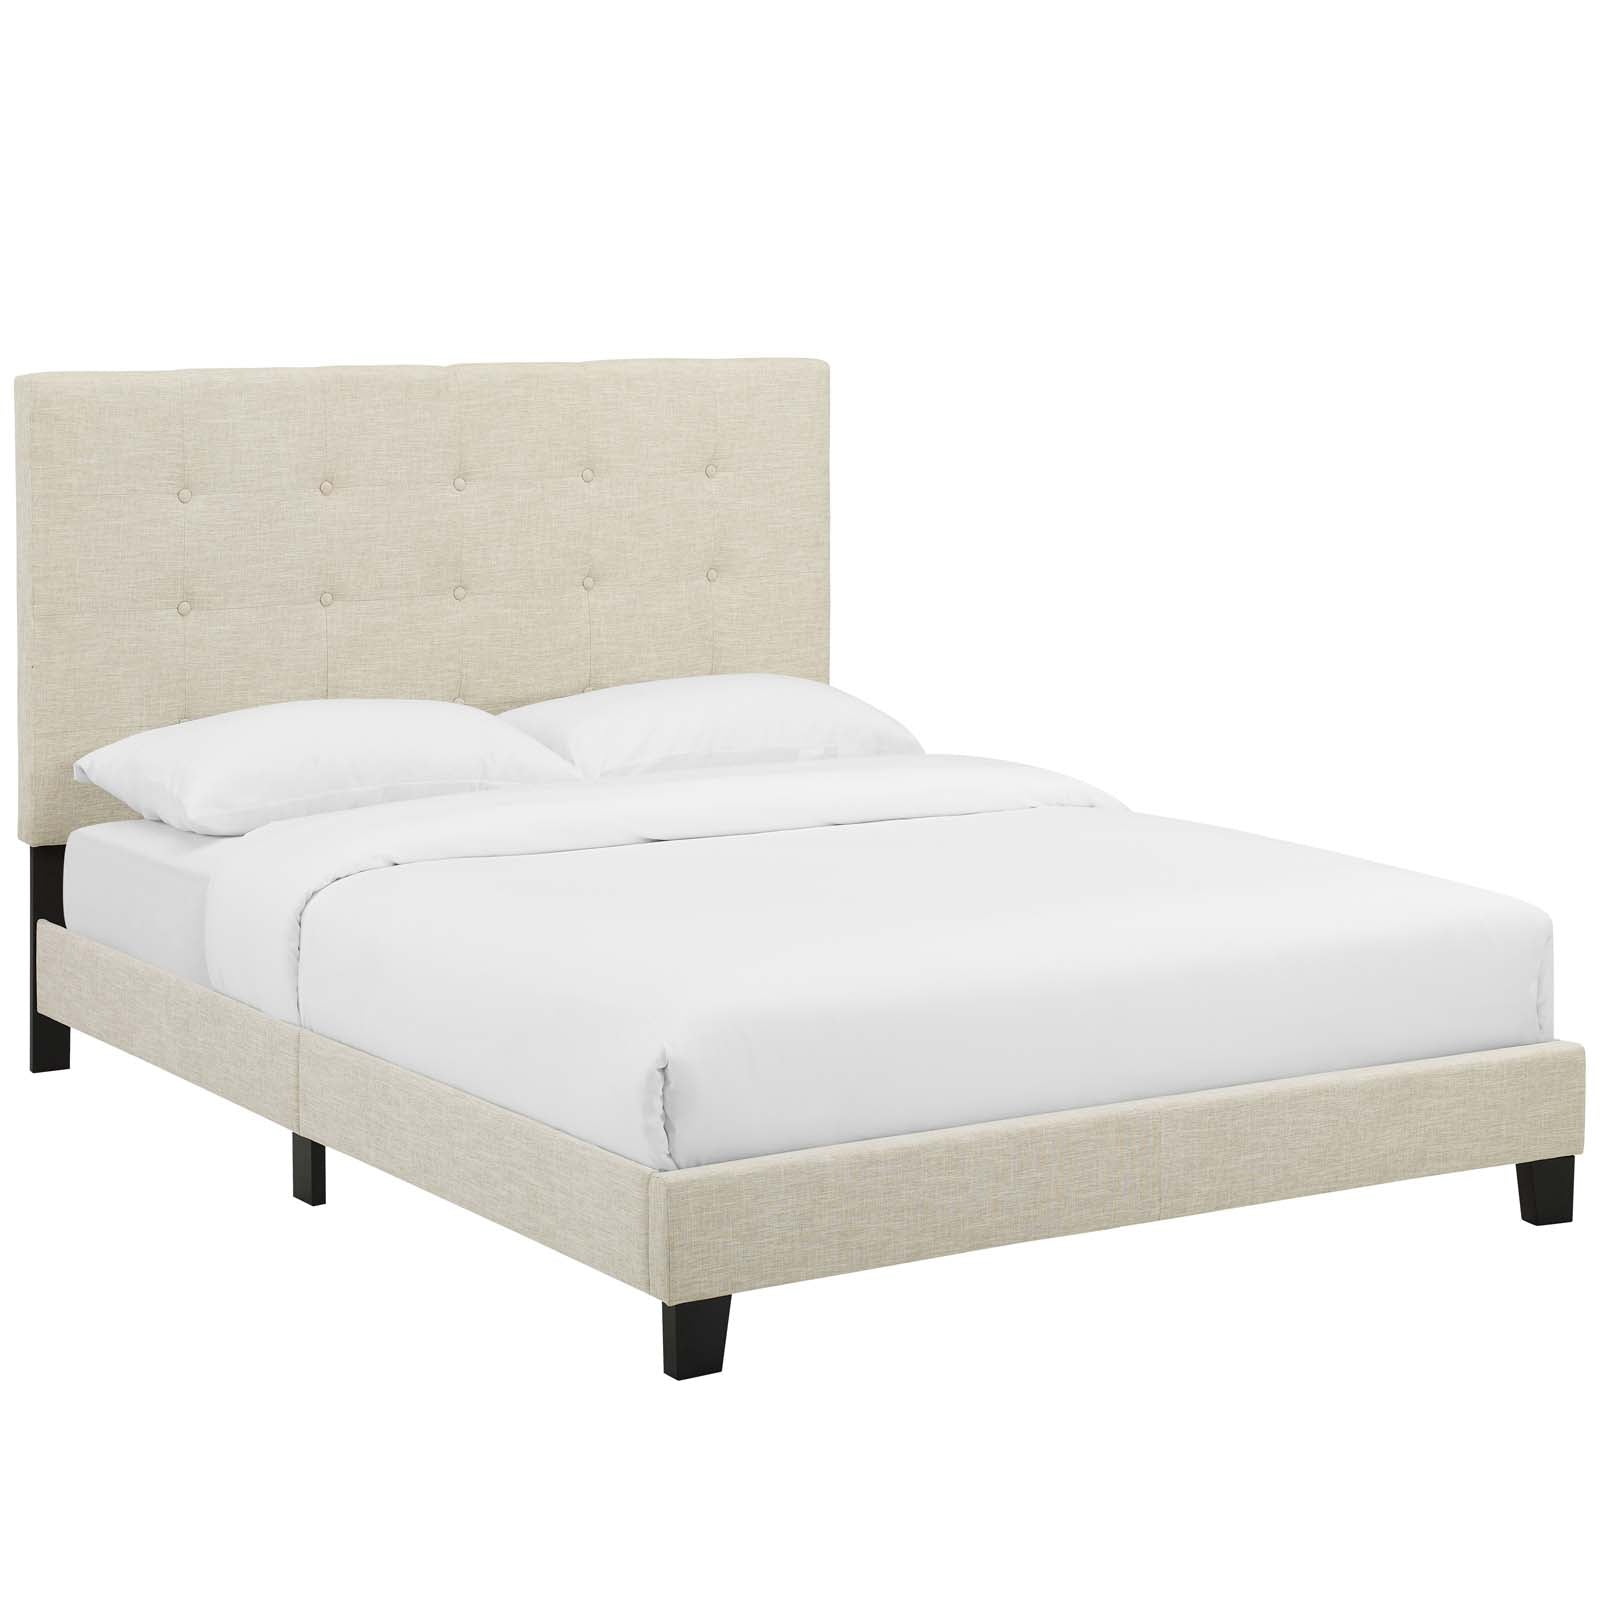 Modway Beds - Melanie Full Tufted Button Upholstered Fabric Platform Bed Beige